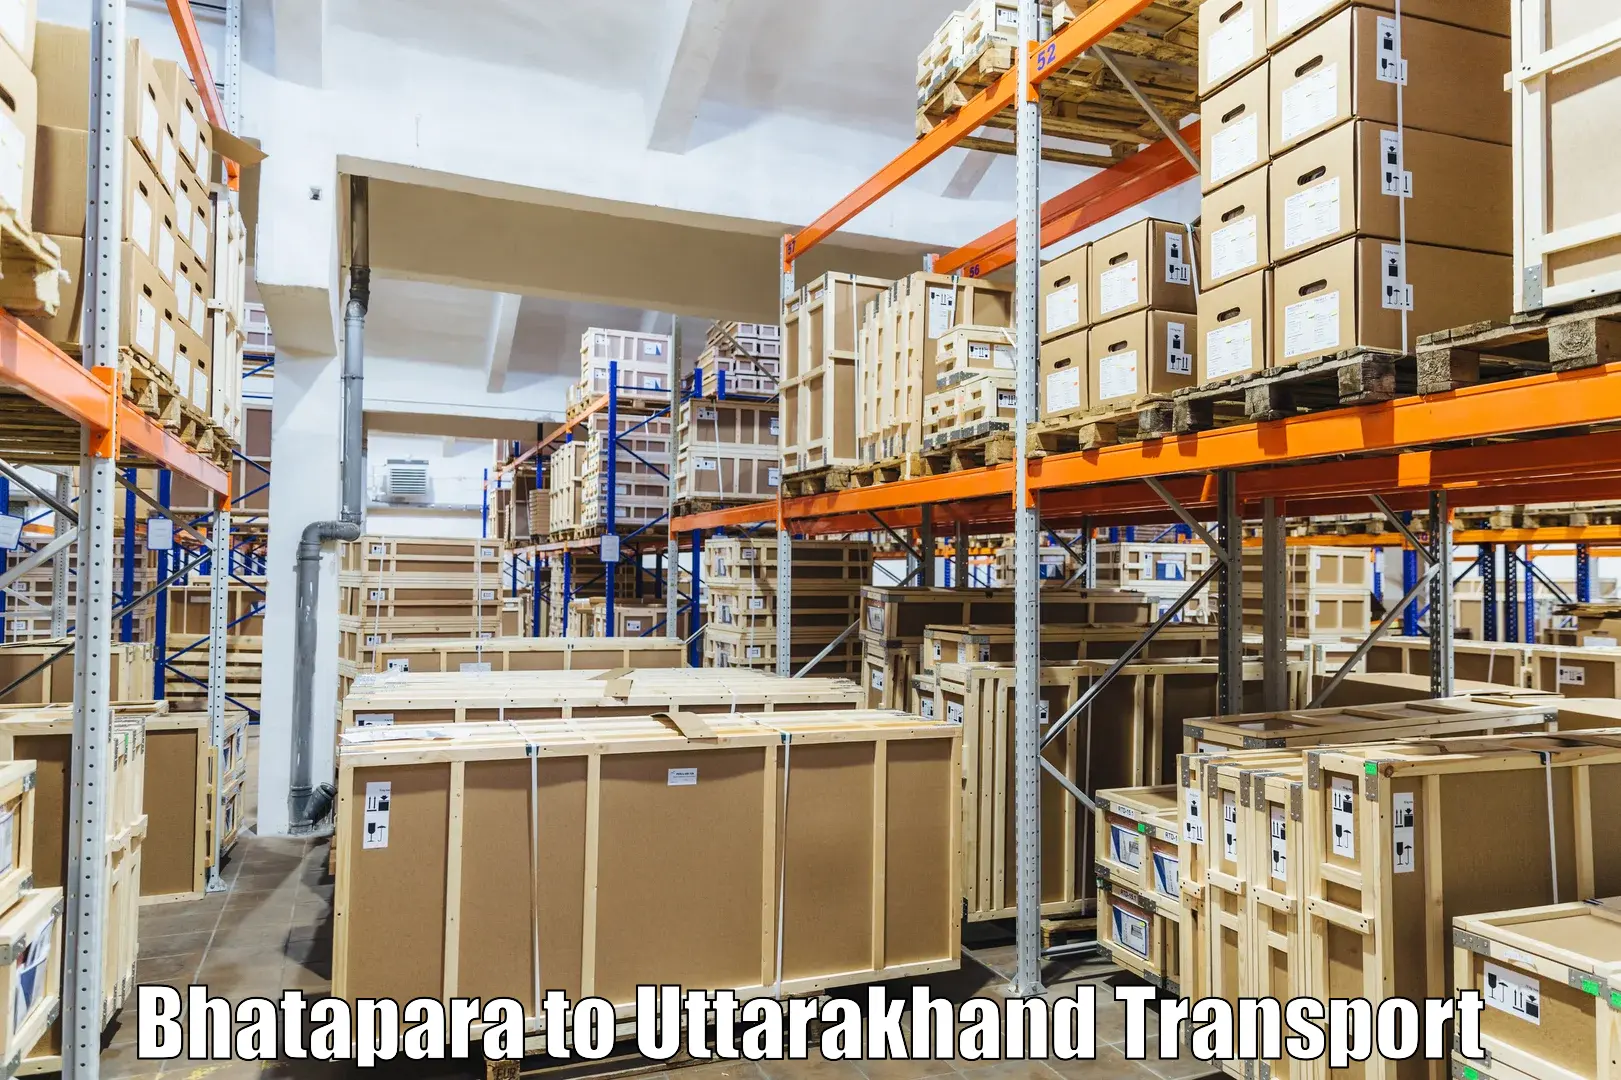 Daily parcel service transport in Bhatapara to Paithani